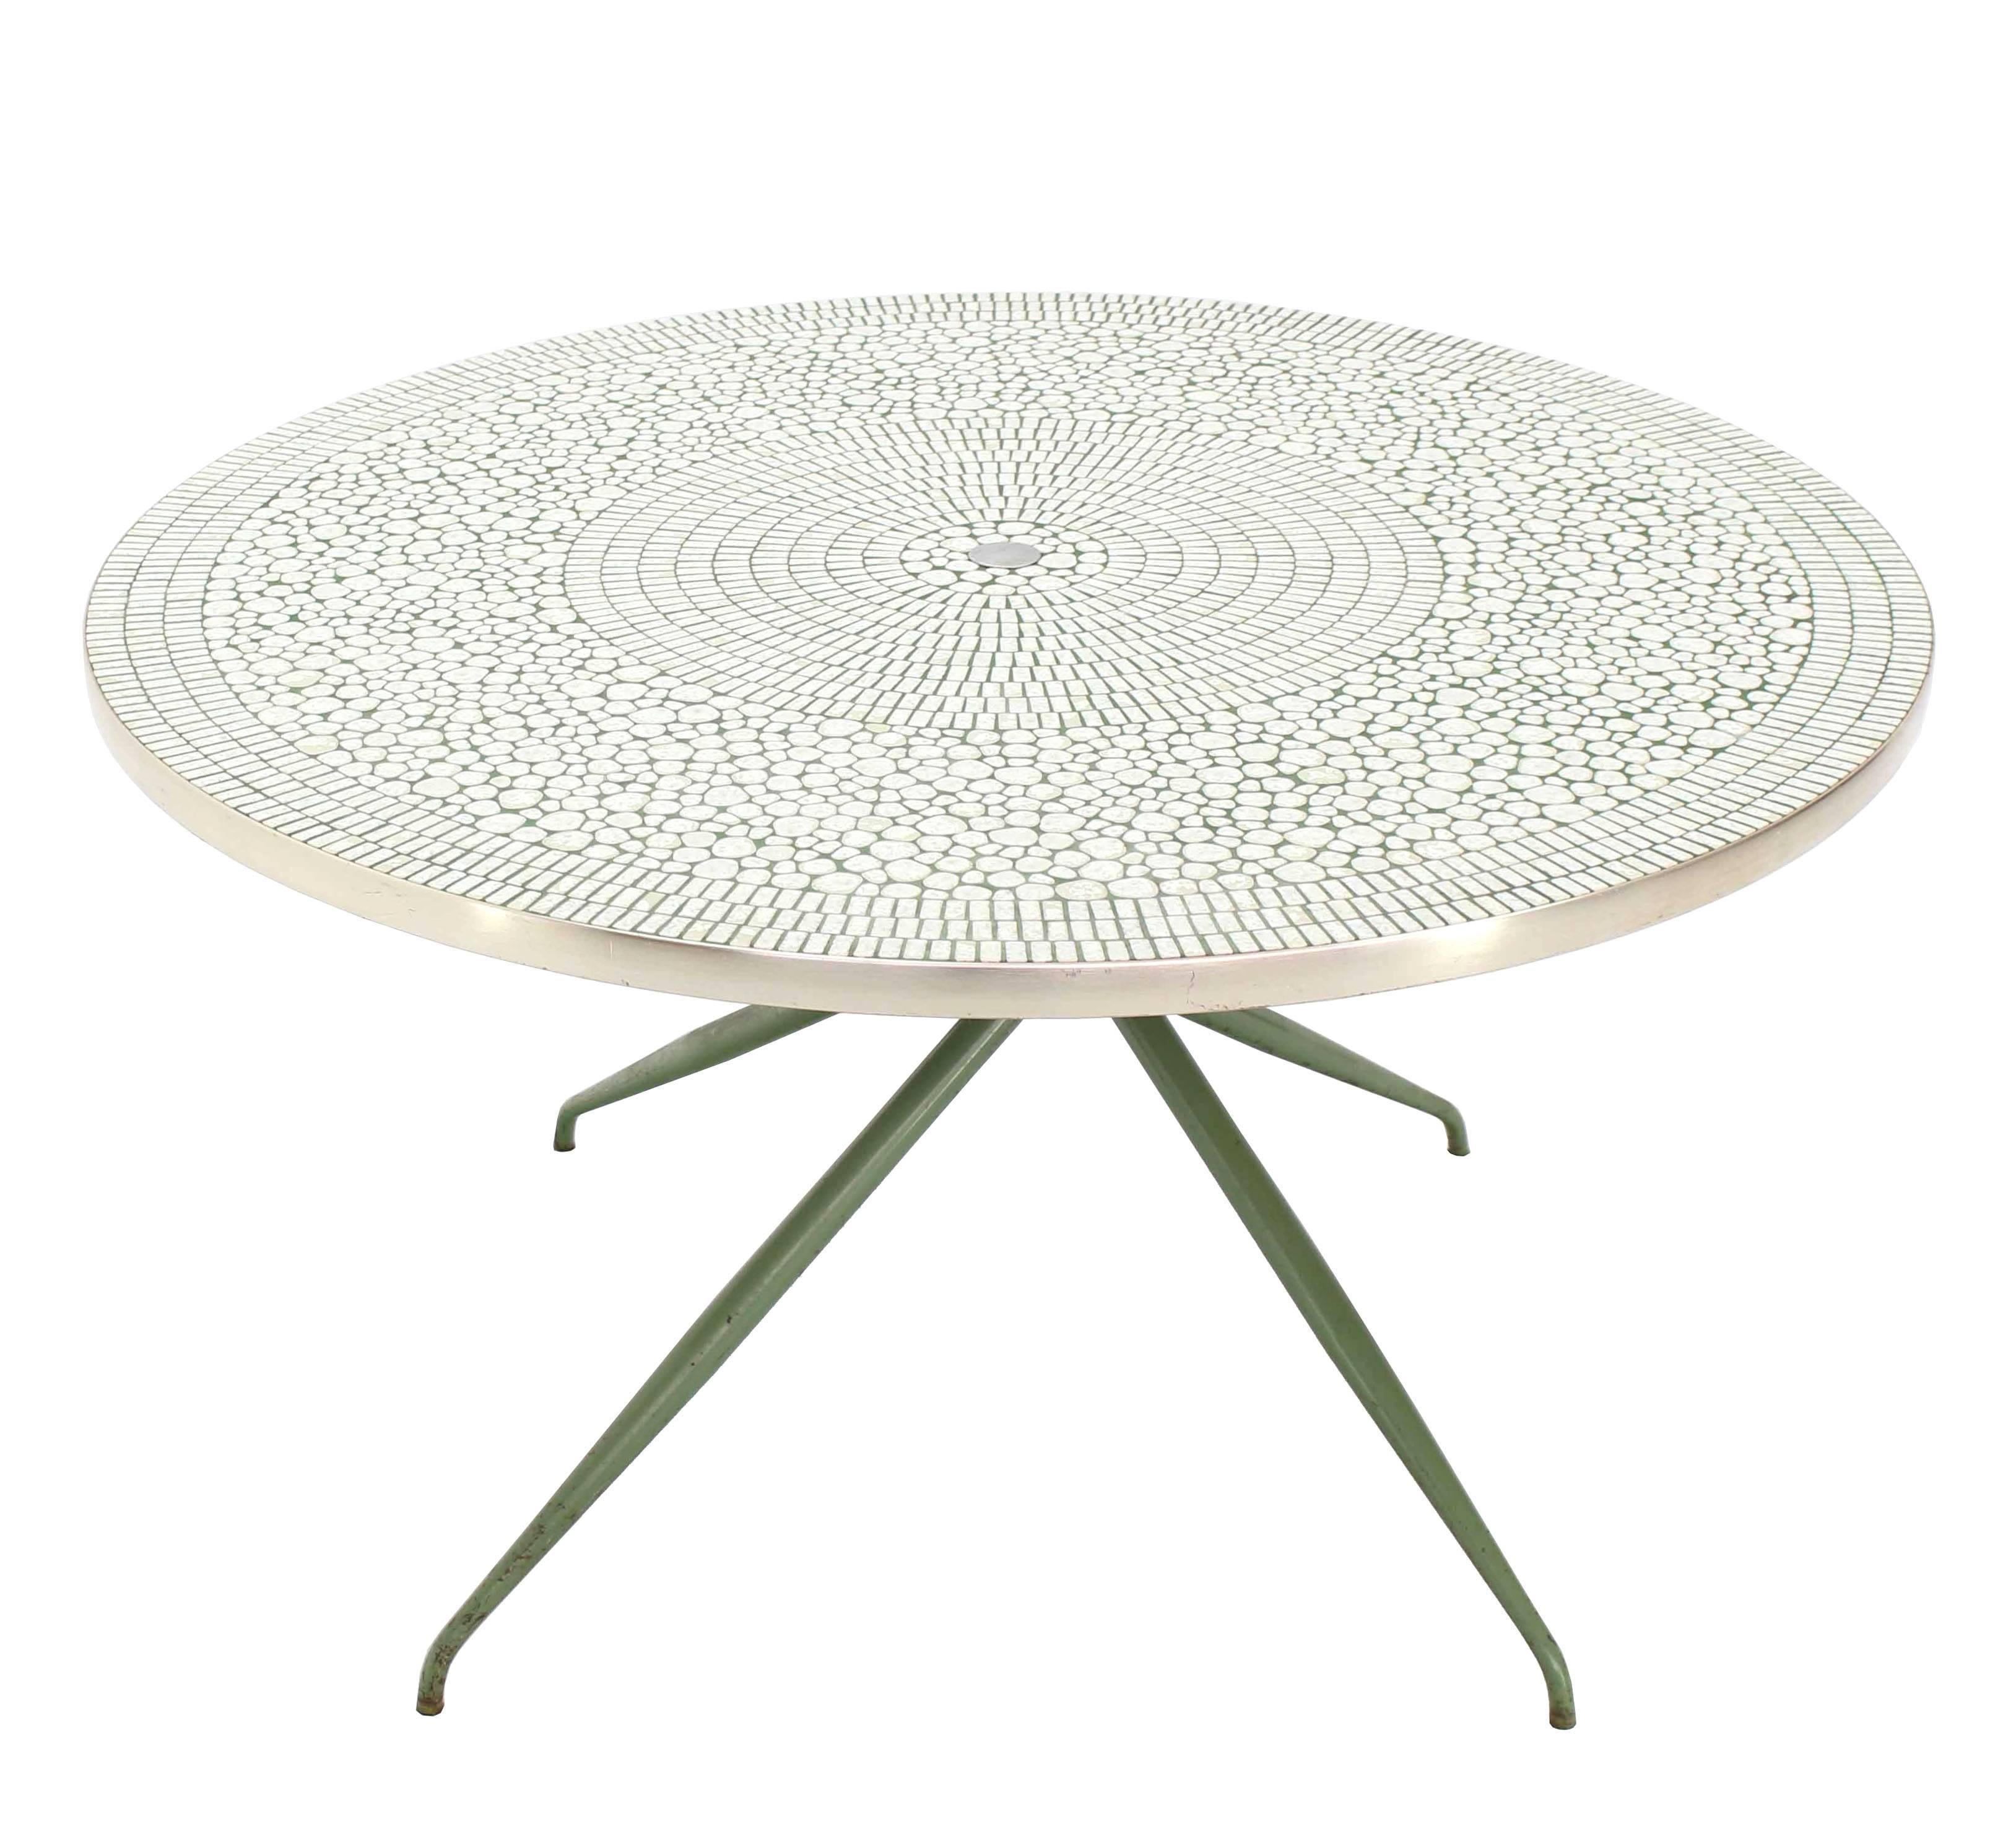 Very nice Mid-Century Modern outdoor mosaic game table.